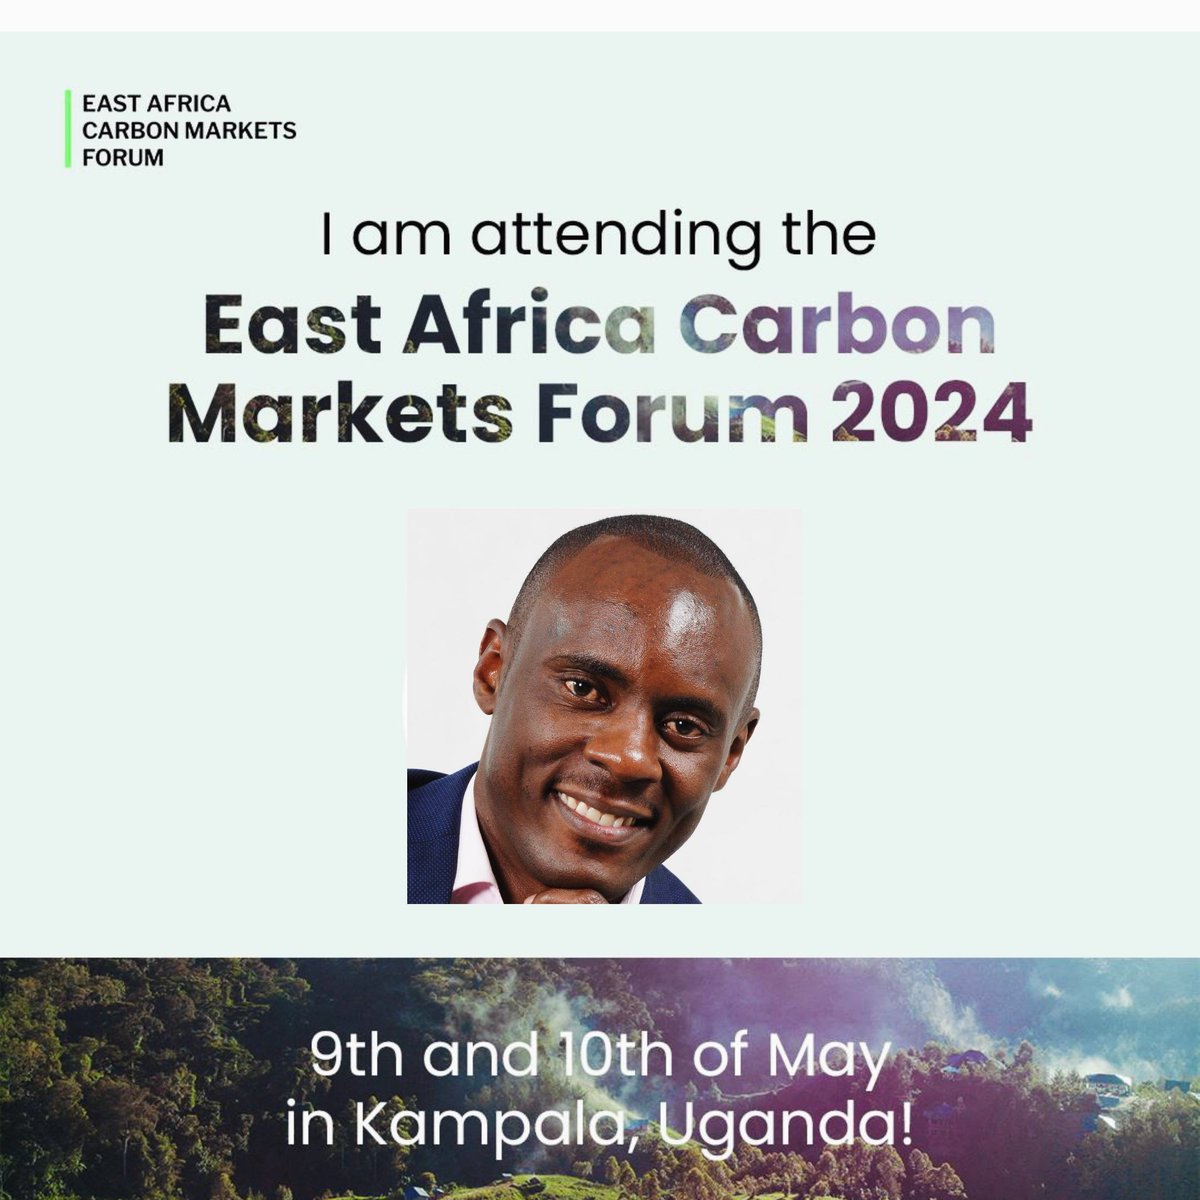 I will be at the East Africa Carbon Markets Forum exploring unlocking opportunities for sustainable development with stakeholders in the region’s carbon markets initiatives #carbonmarkets #EACMF2024 #CarbonMarkets